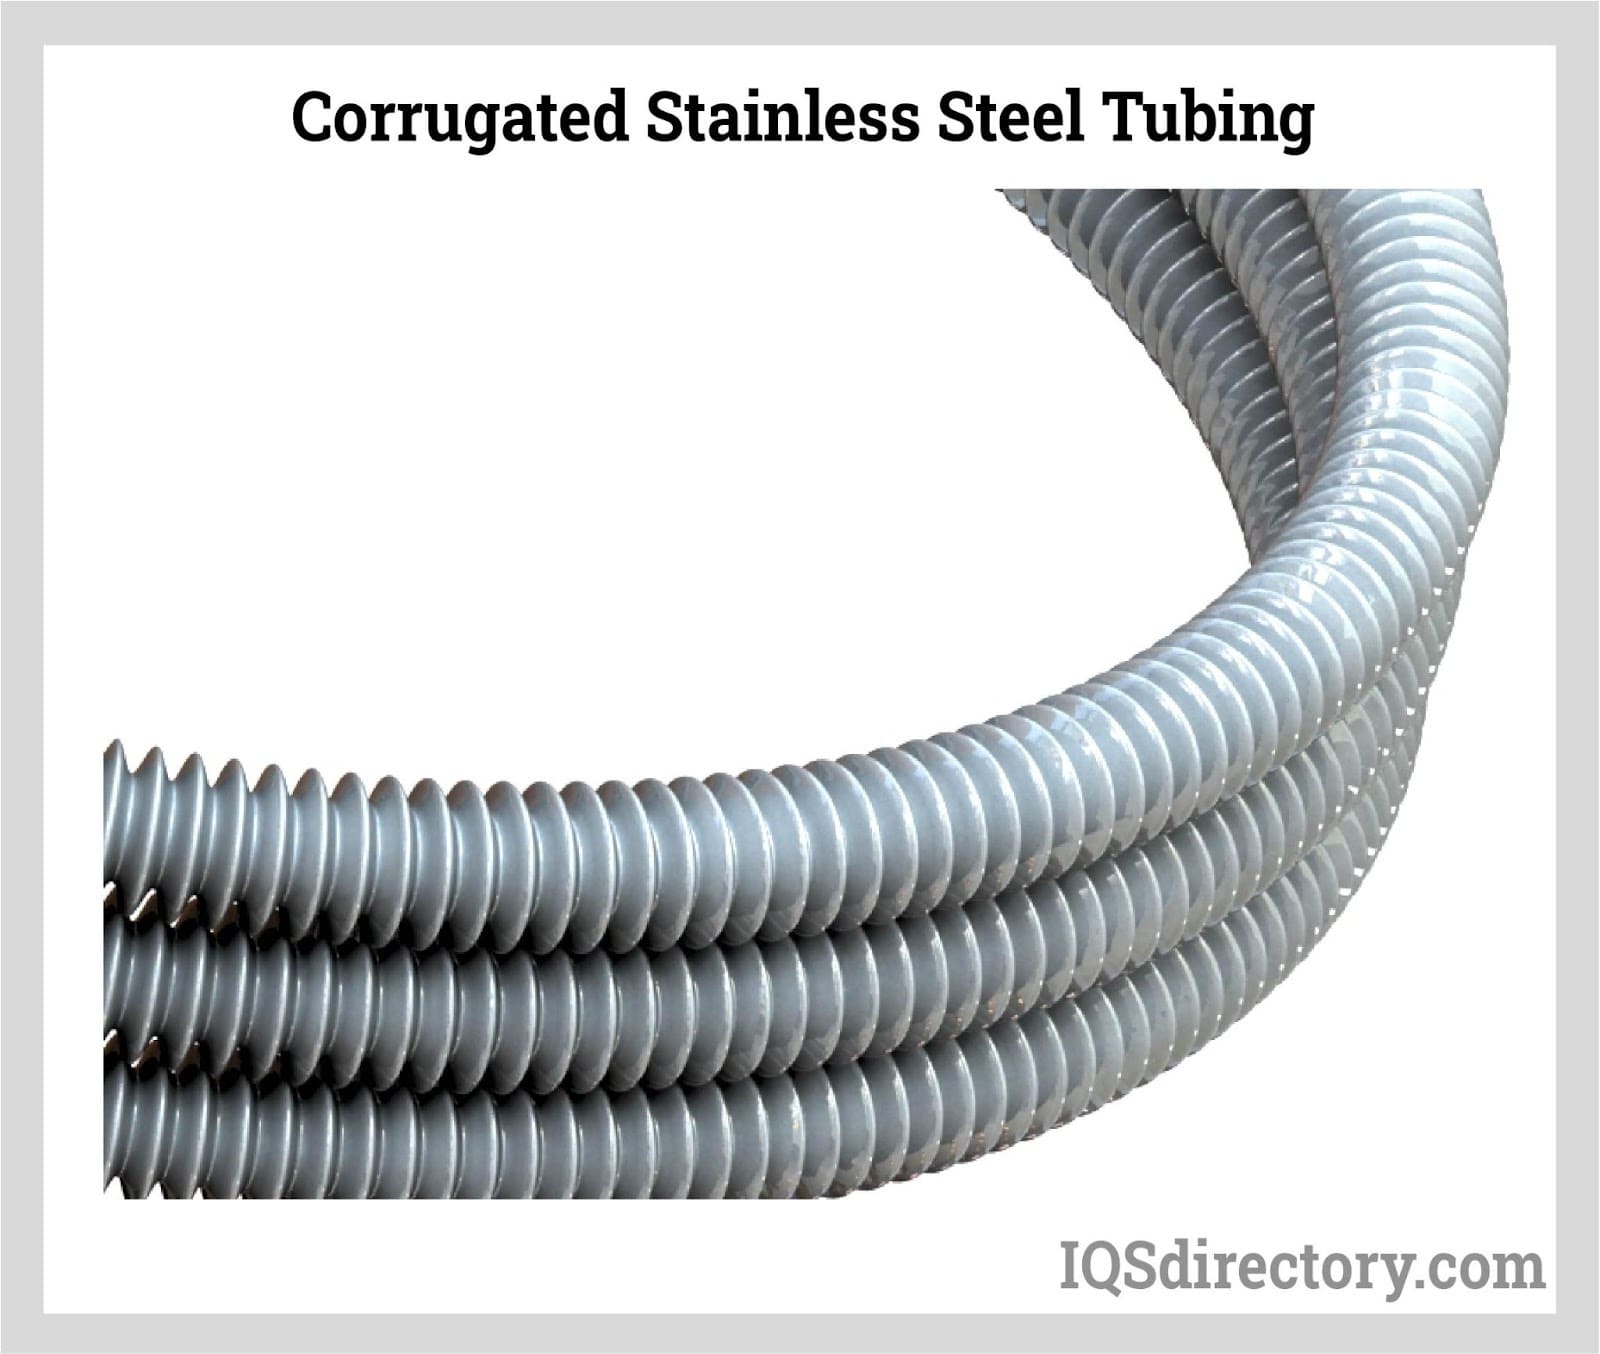 Corrugated Stainless Steel Tubing